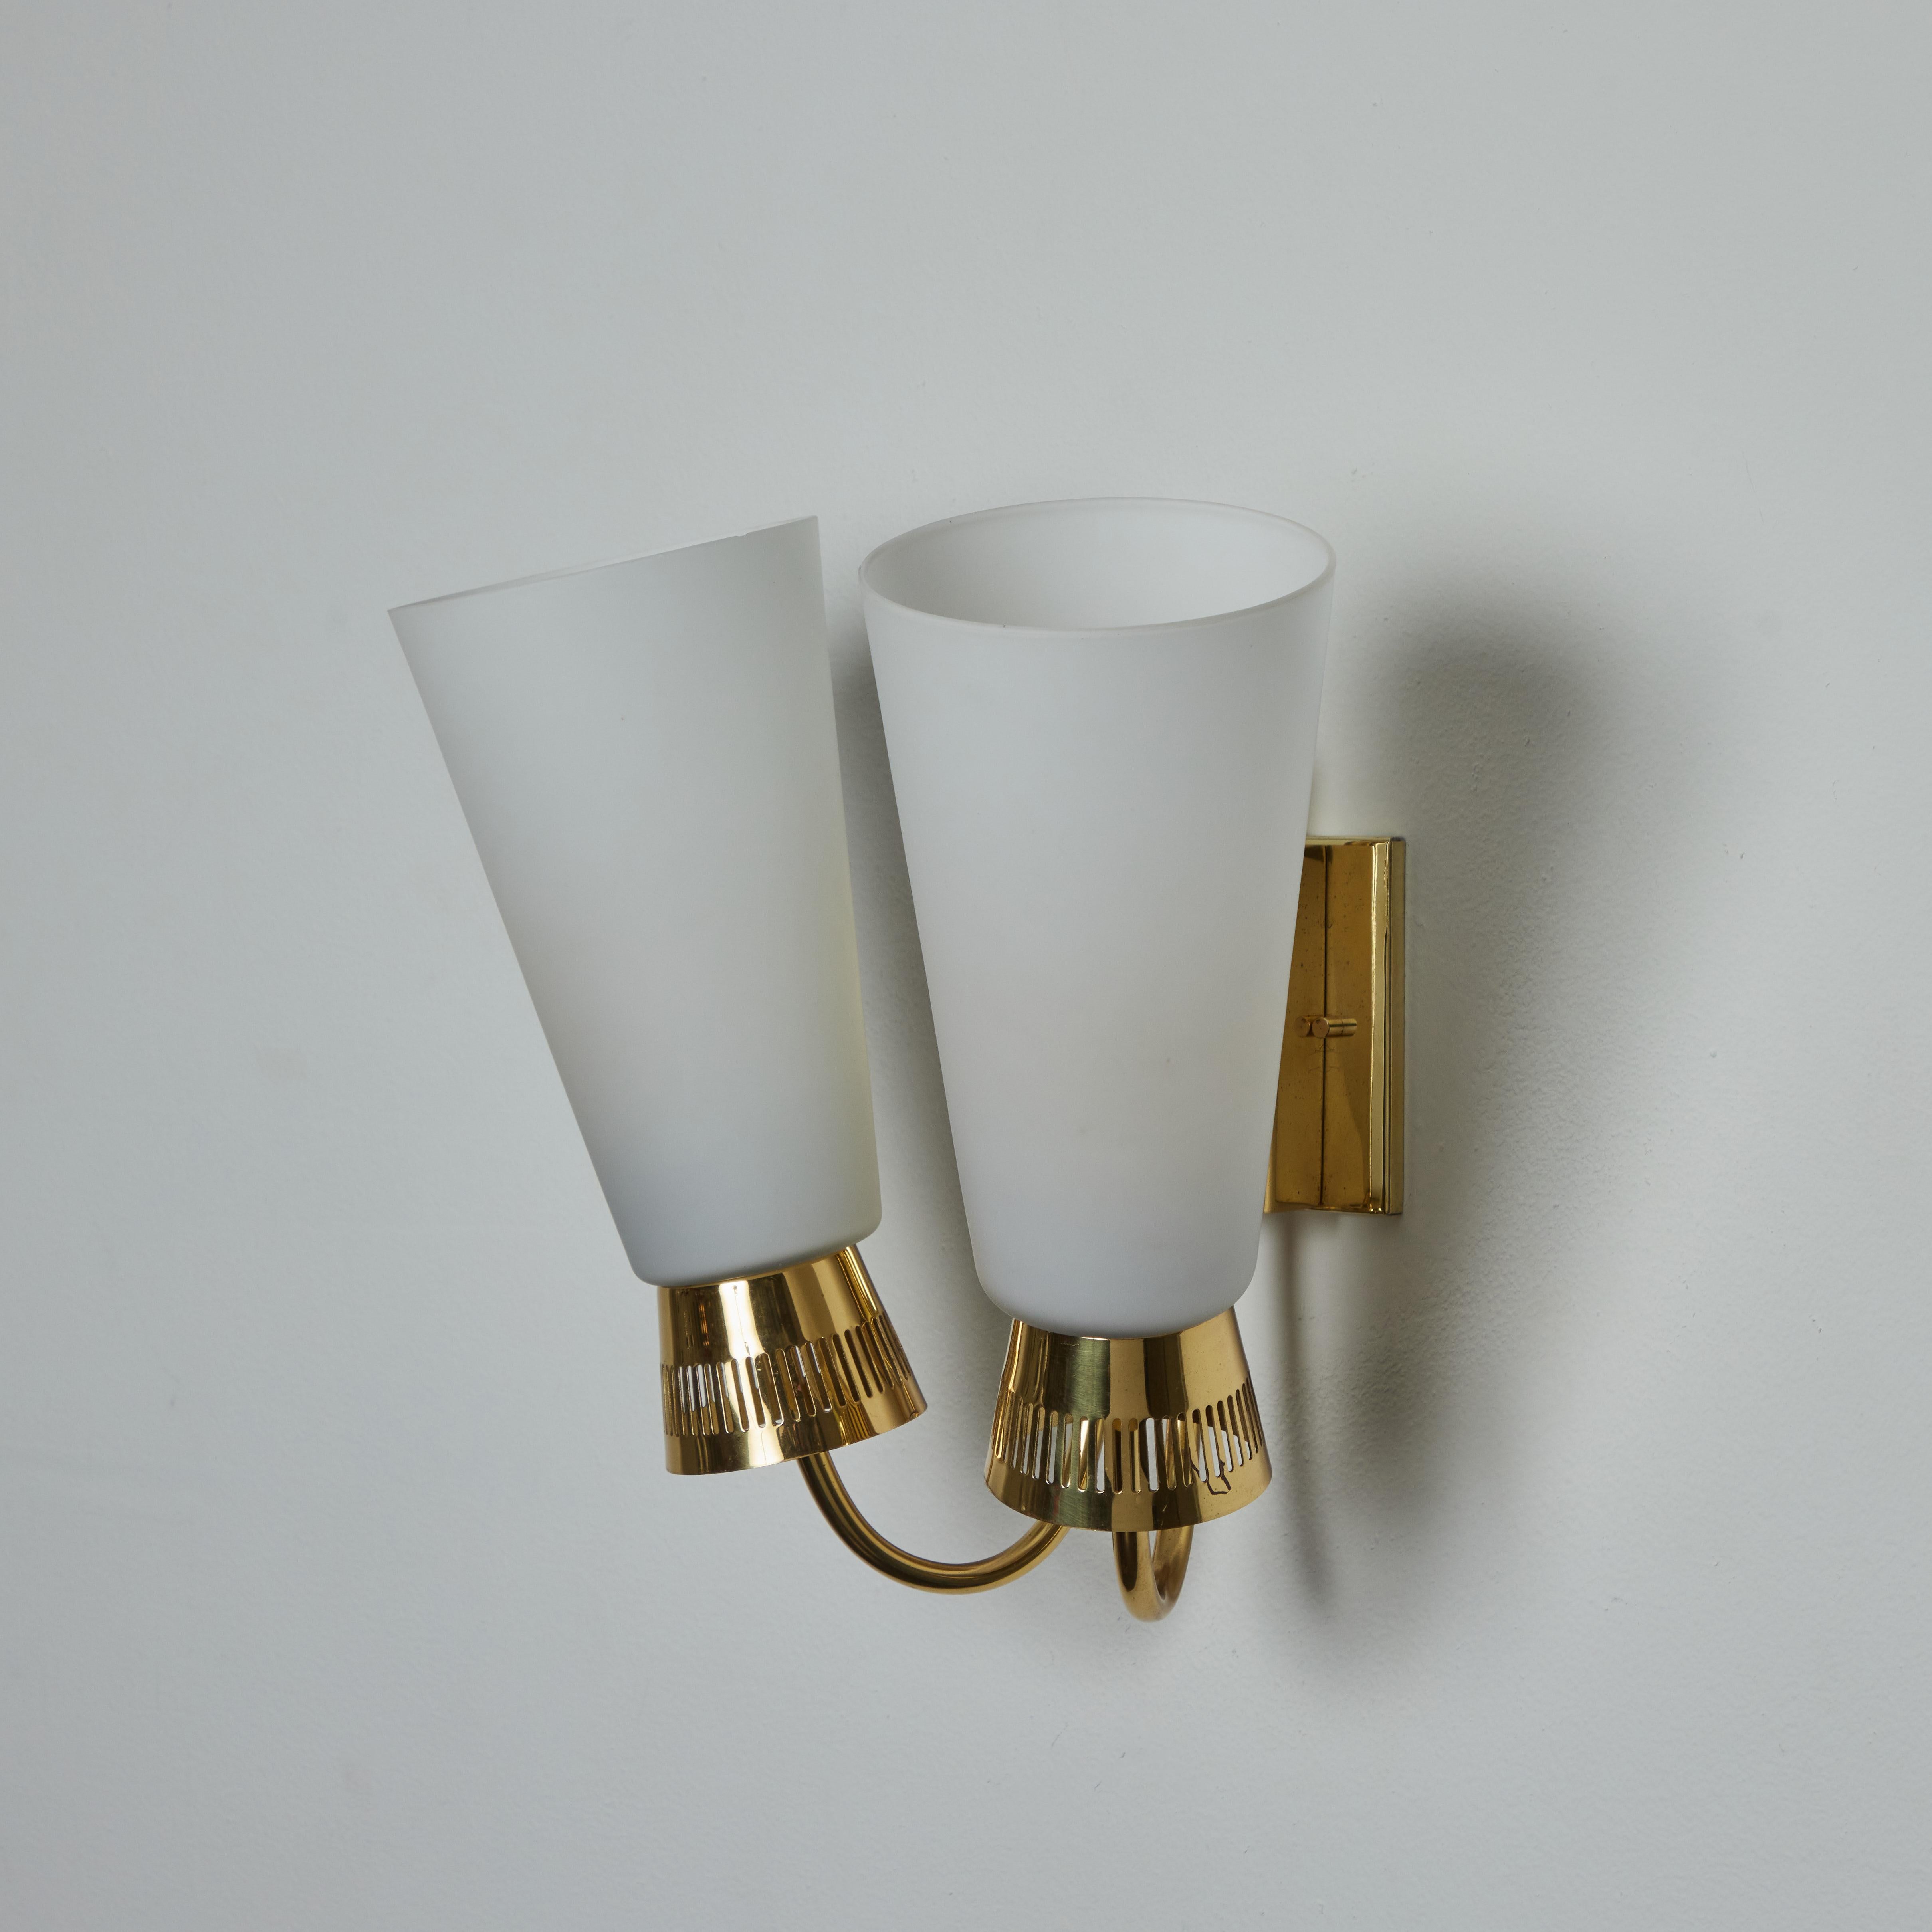 Pair of 1950s Mauri Almari Model #EY60 Brass & Glass Double Sconces for Itsu For Sale 8